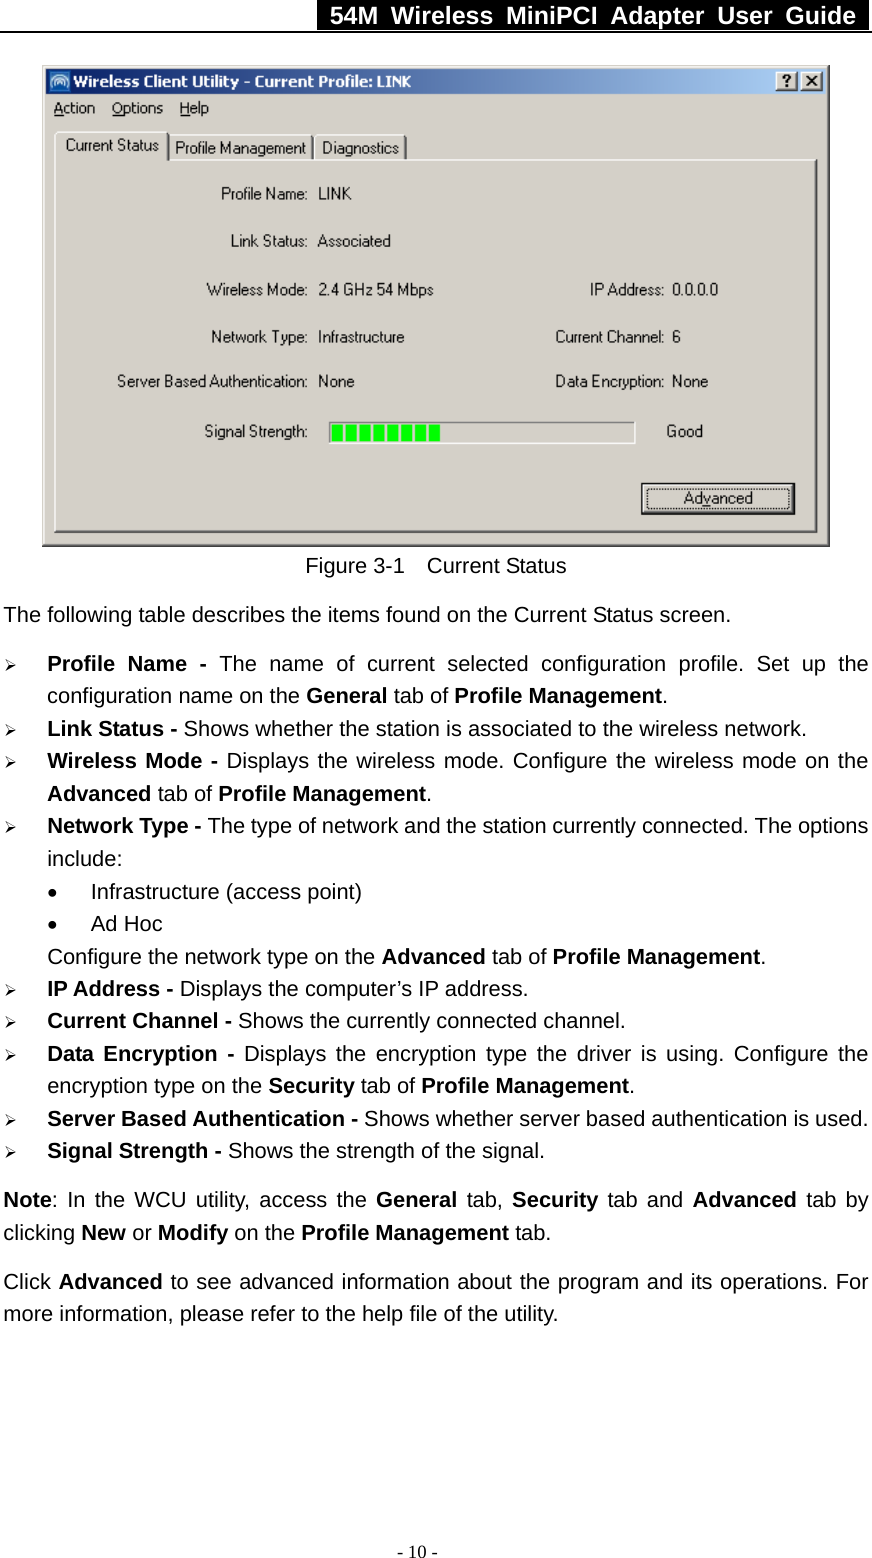   54M Wireless MiniPCI Adapter User Guide  - 10 -  Figure 3-1  Current Status The following table describes the items found on the Current Status screen. ¾ Profile Name - The name of current selected configuration profile. Set up the configuration name on the General tab of Profile Management.  ¾ Link Status - Shows whether the station is associated to the wireless network. ¾ Wireless Mode - Displays the wireless mode. Configure the wireless mode on the Advanced tab of Profile Management. ¾ Network Type - The type of network and the station currently connected. The options include: •  Infrastructure (access point) • Ad Hoc Configure the network type on the Advanced tab of Profile Management. ¾ IP Address - Displays the computer’s IP address. ¾ Current Channel - Shows the currently connected channel. ¾ Data Encryption - Displays the encryption type the driver is using. Configure the encryption type on the Security tab of Profile Management. ¾ Server Based Authentication - Shows whether server based authentication is used. ¾ Signal Strength - Shows the strength of the signal. Note: In the WCU utility, access the General tab, Security tab and Advanced tab by clicking New or Modify on the Profile Management tab. Click Advanced to see advanced information about the program and its operations. For more information, please refer to the help file of the utility. 